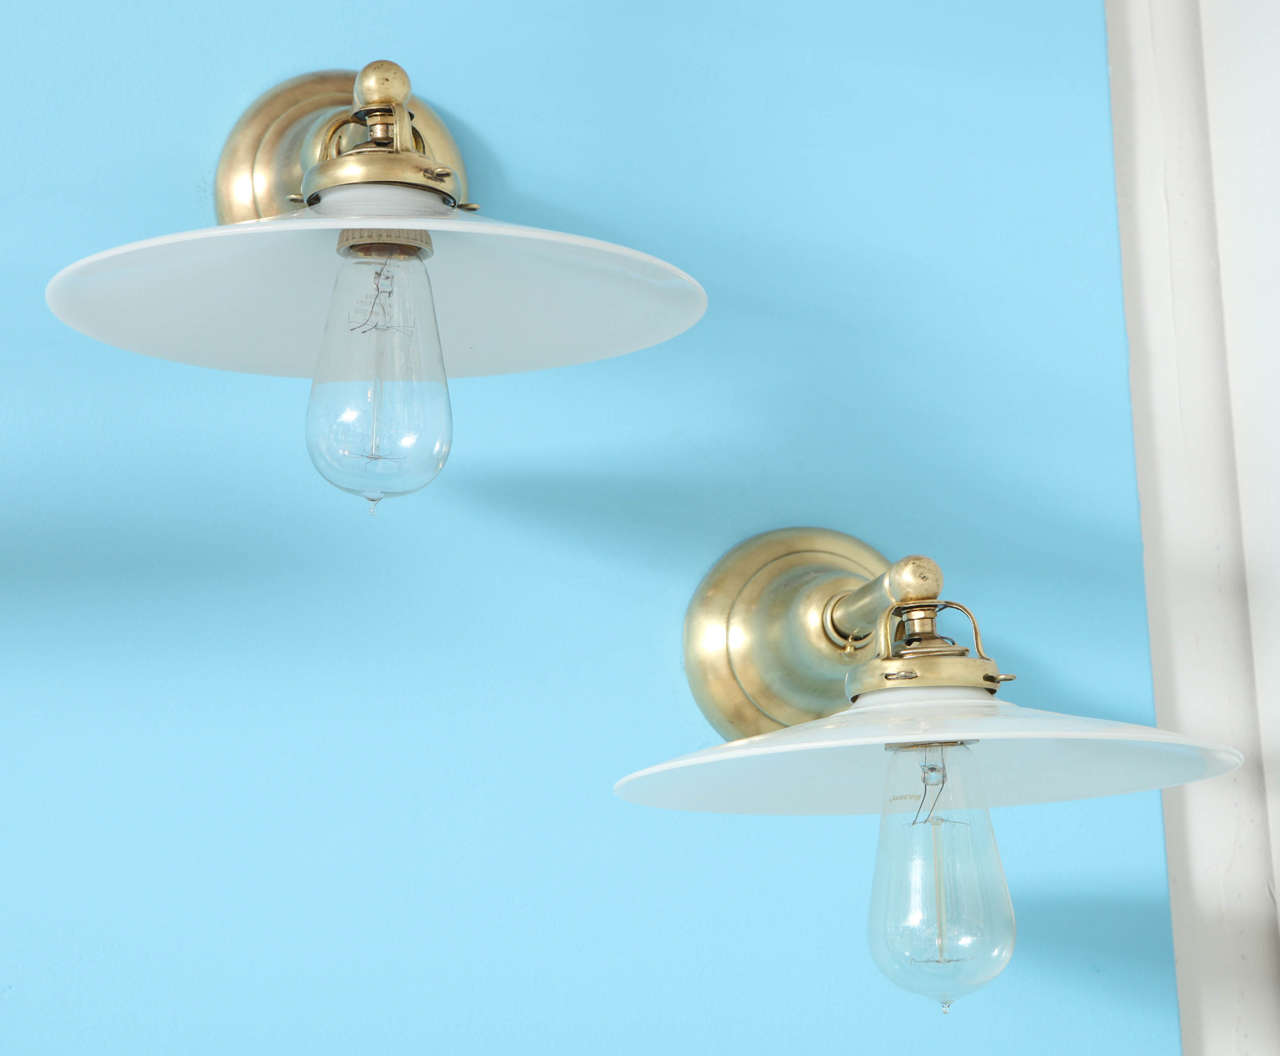 Pair of vintage brass wall lights / sconces with antique white milk glass disk shades. USA, circa 1910.  Extended arms hold a 10 inch diameter shade.

Dimensions:
4.5 inch wall plate diameter (part that mounts to wall) 
13 inch depth